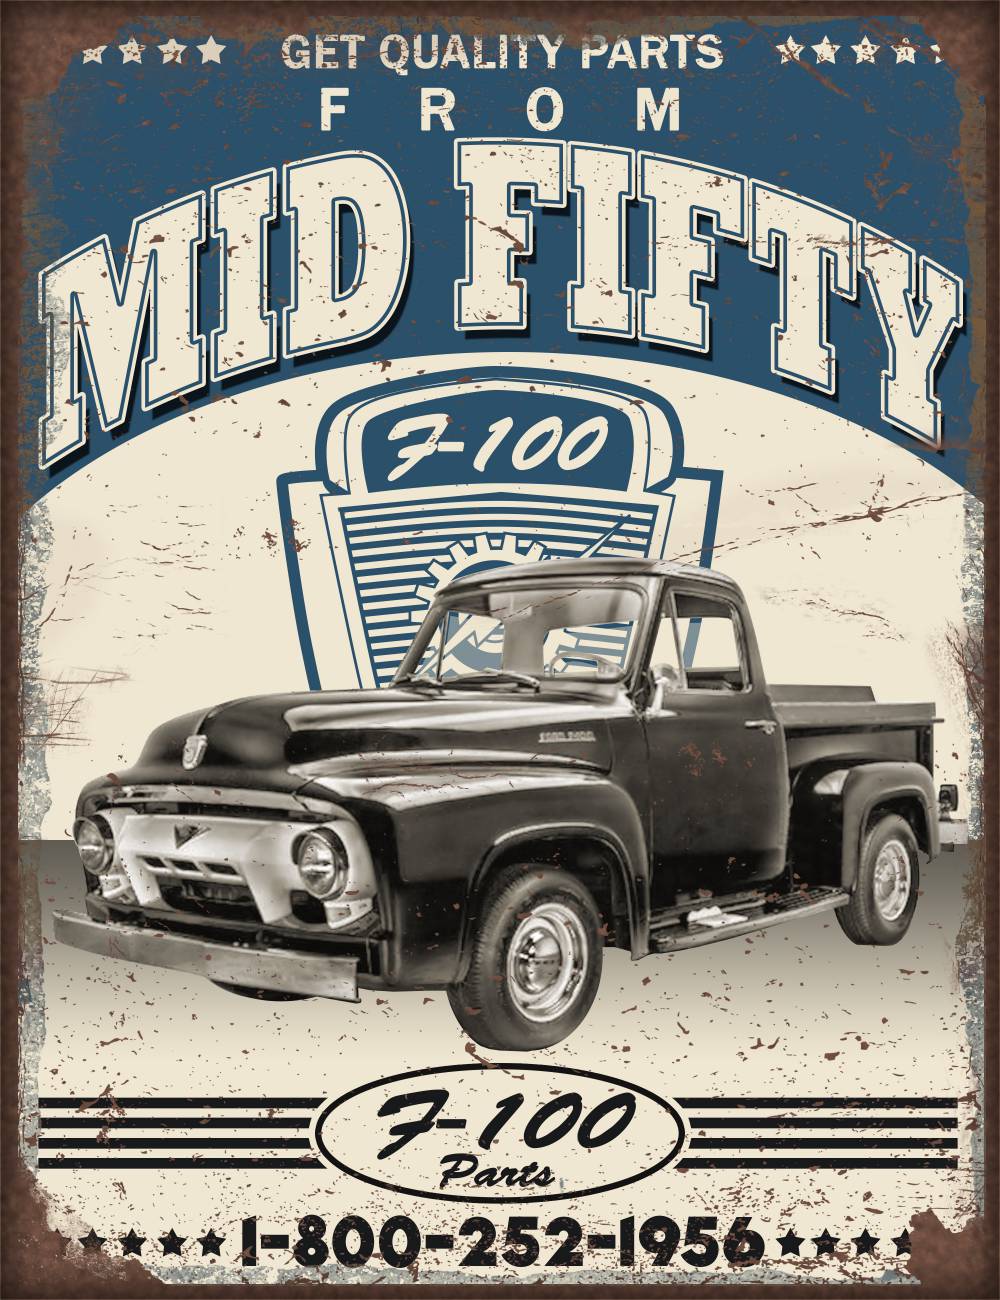 Mid fifty ford #1